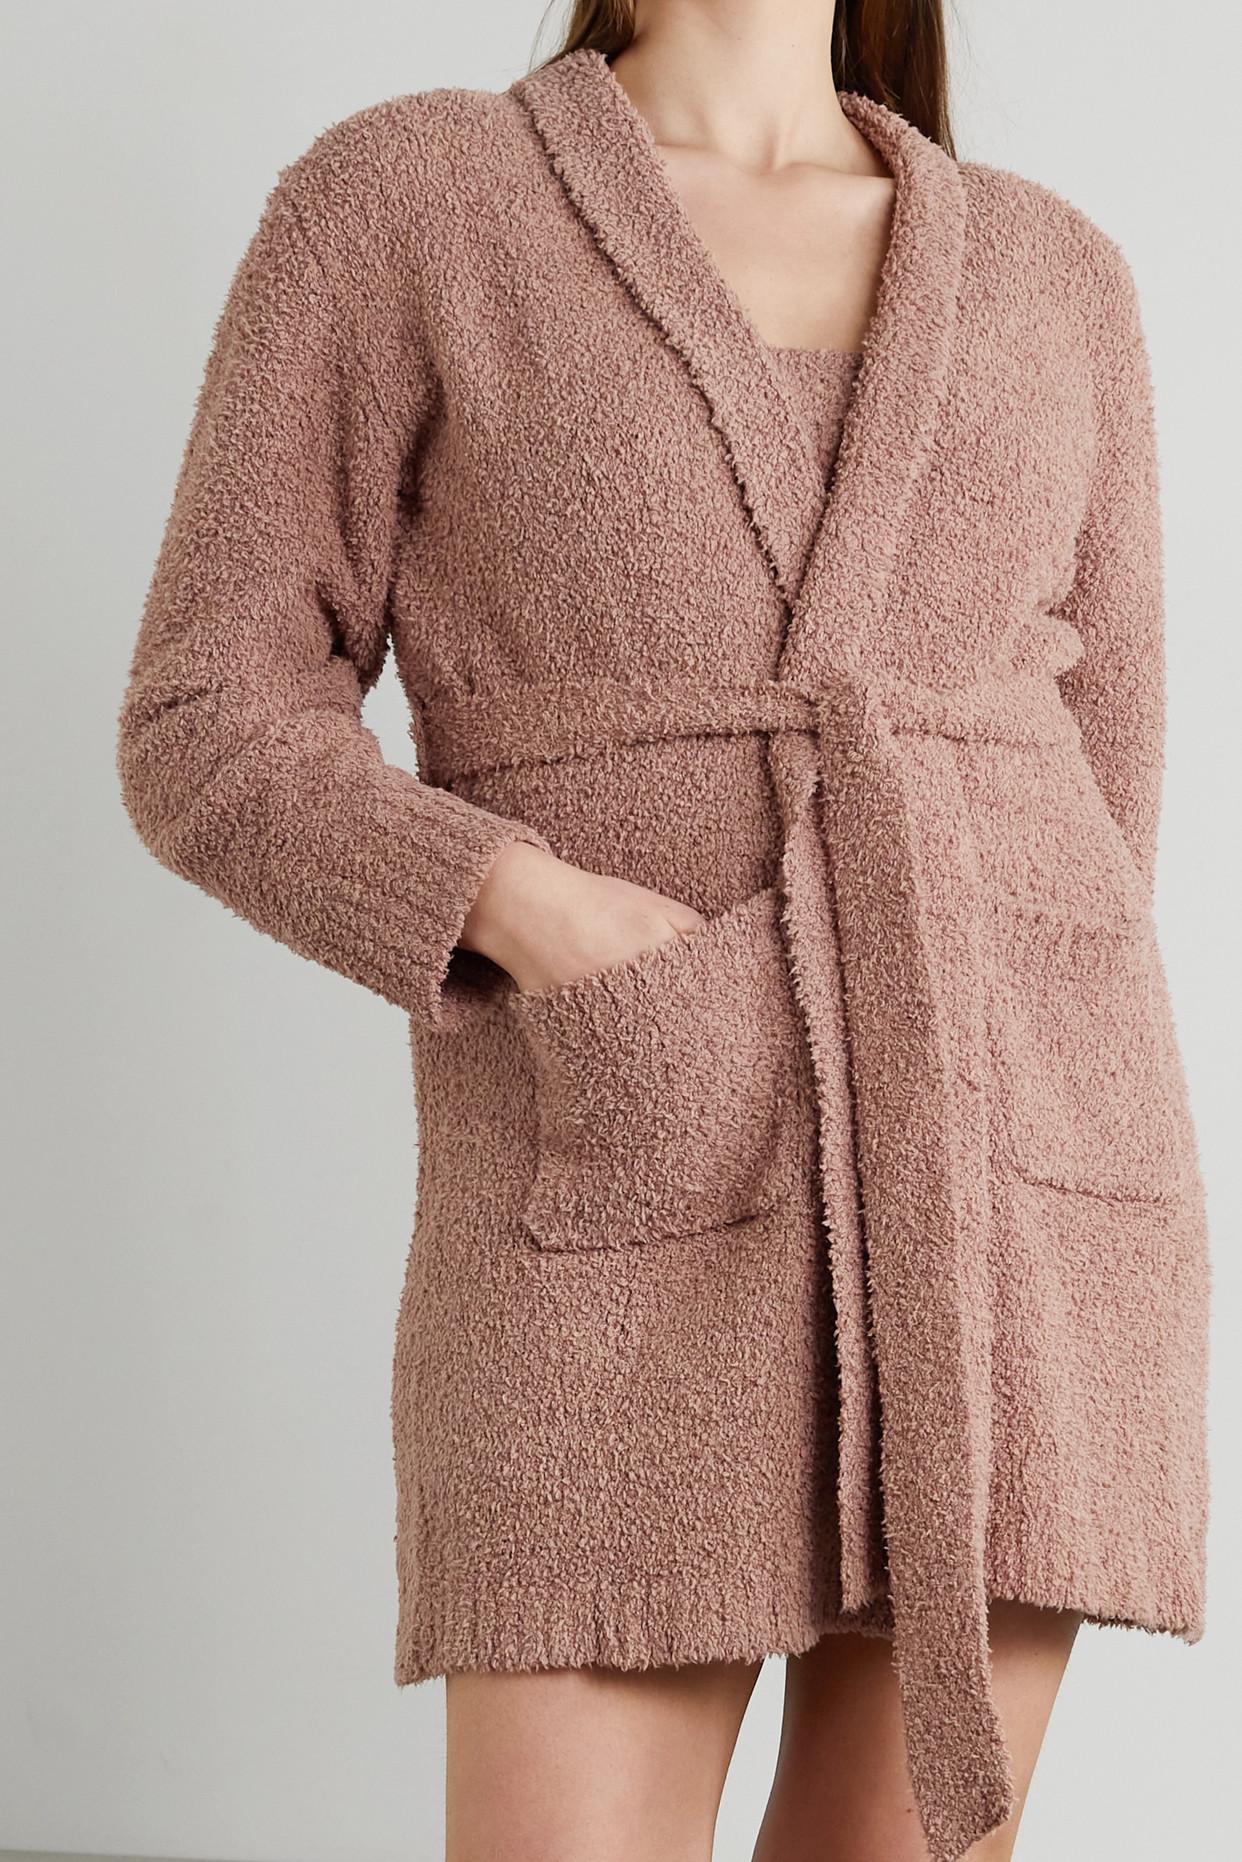 Skims Cozy Knit Bouclé Robe in Pink | Lyst